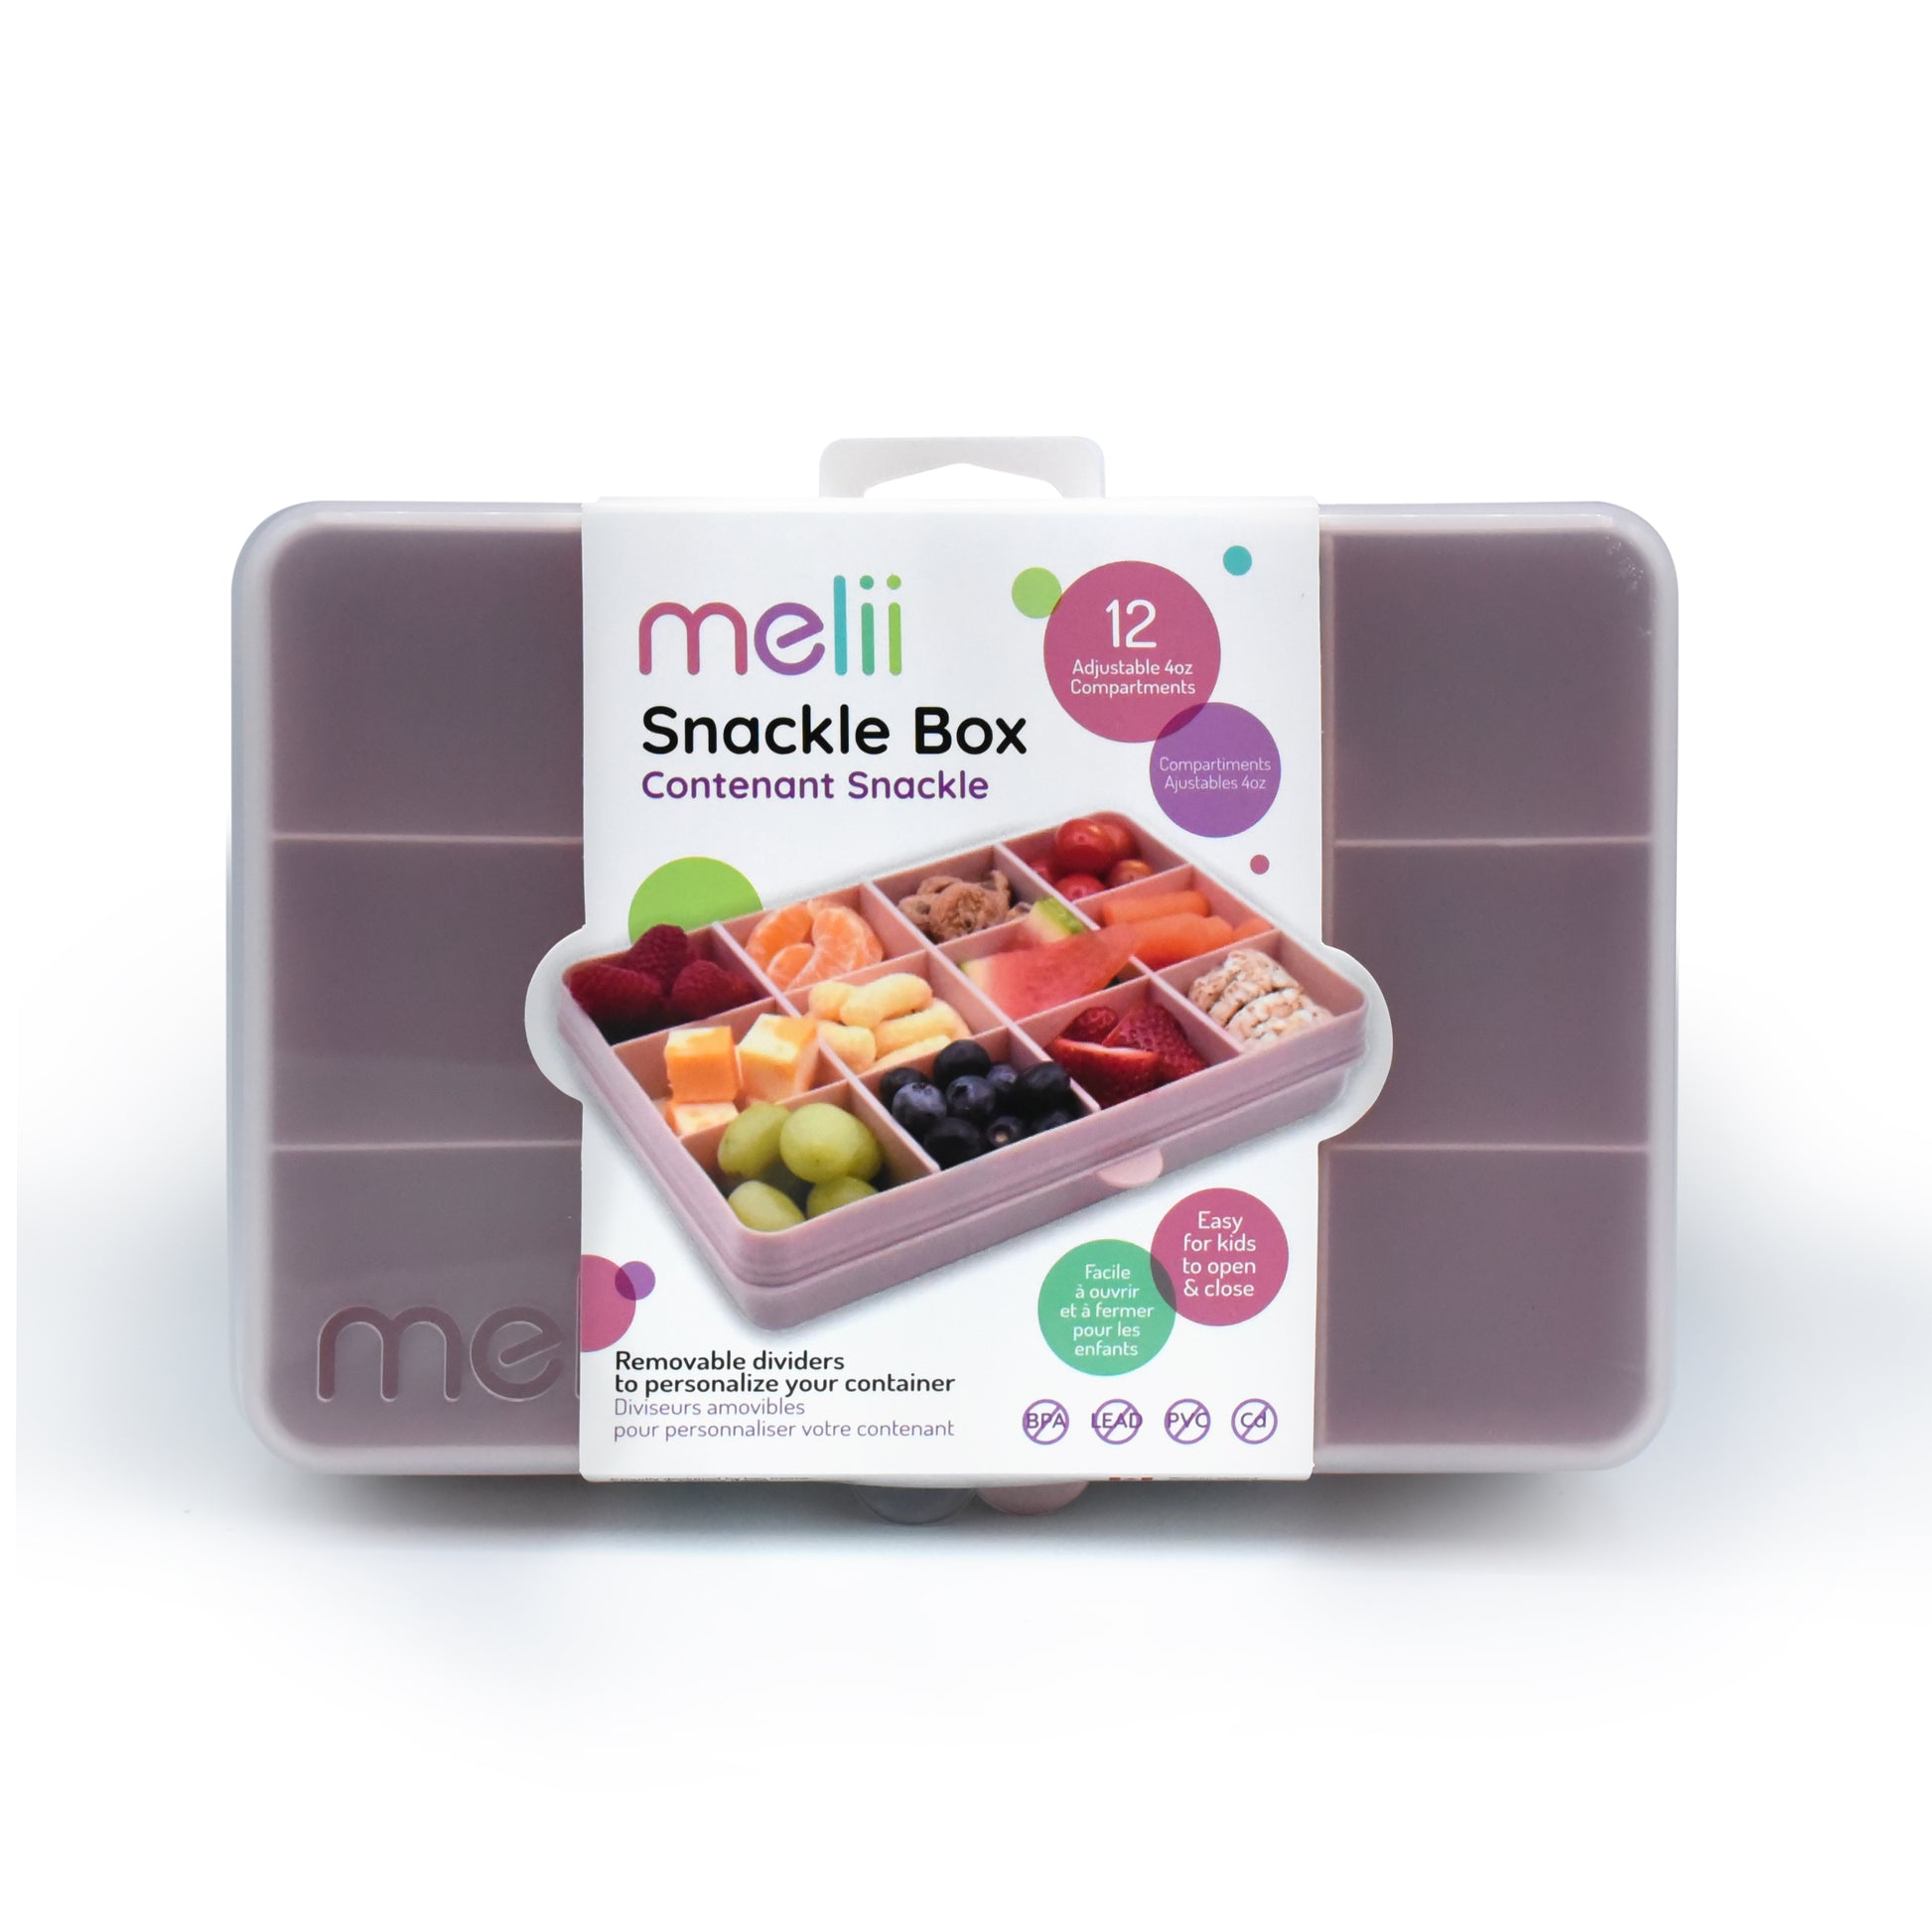 melii Snackle Box Pink - 12 Compartment Snack Container with Removable Dividers for Customizable Storage - Ideal for On the Go Snacking, BPA Free, Easy to Open and Clean